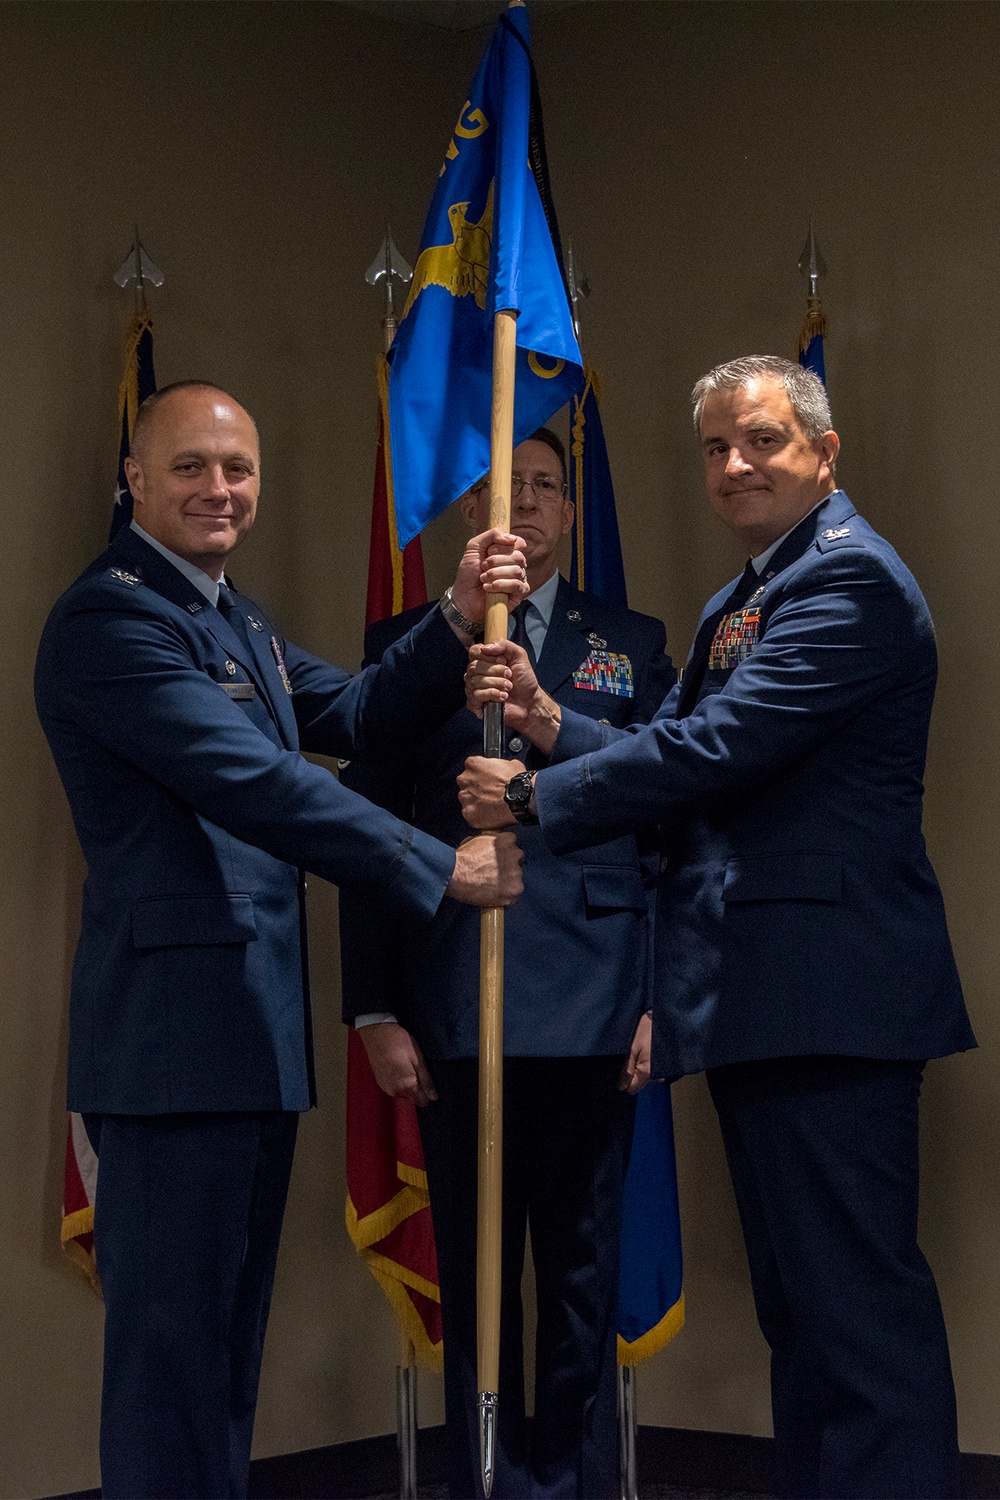 188th Wing promotes colonels during dual ceremonies